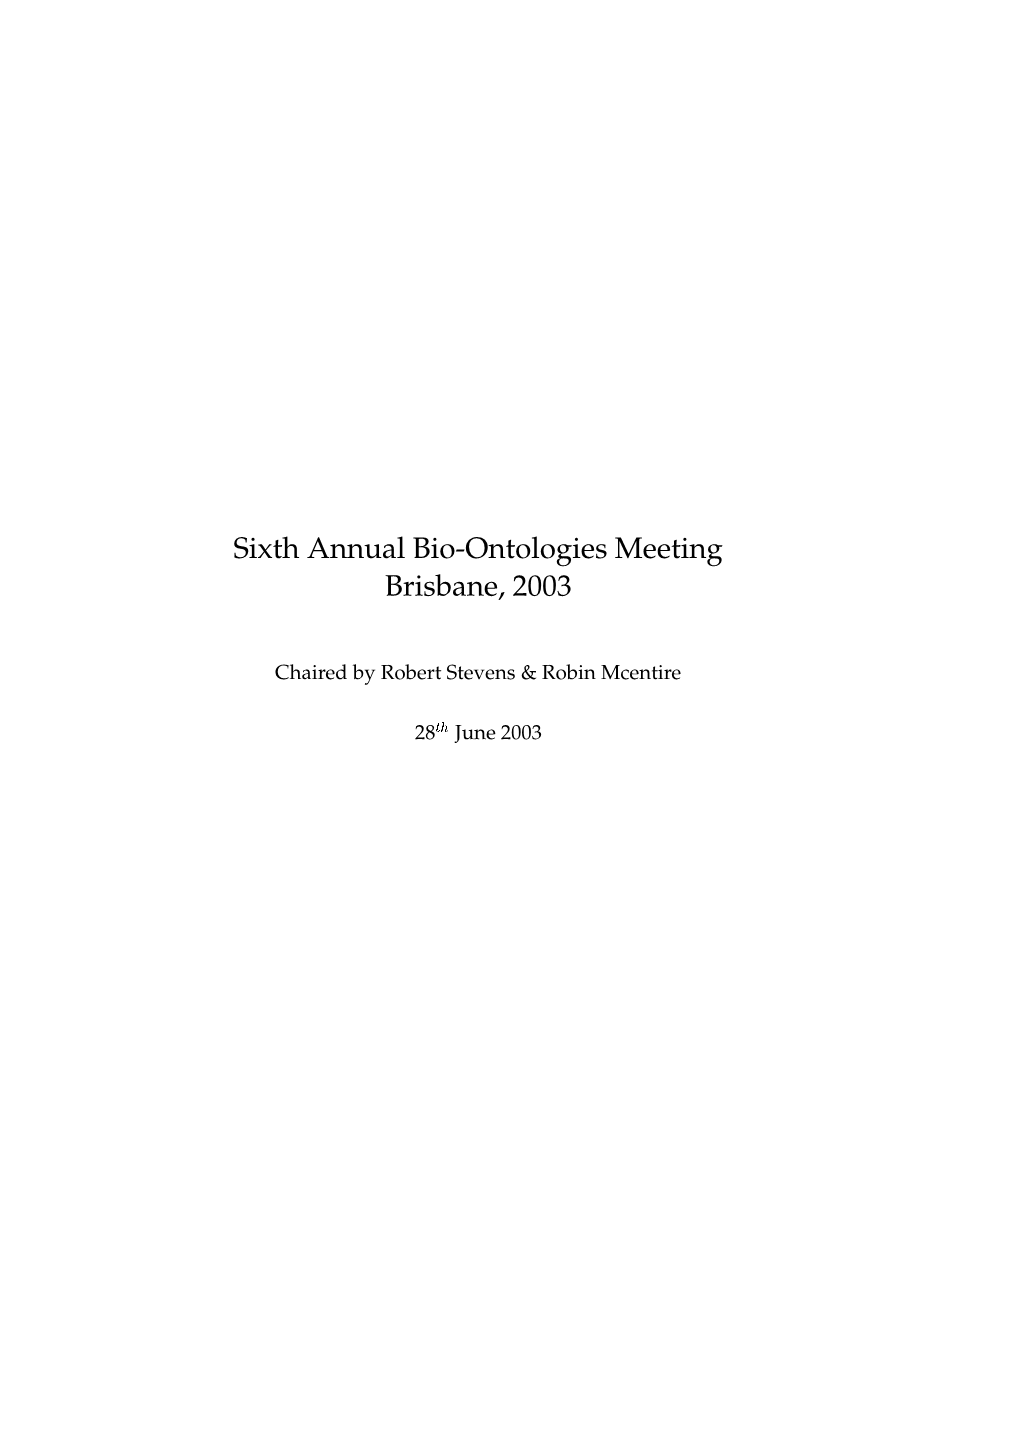 PDF of Meeting Booklet in US Letter